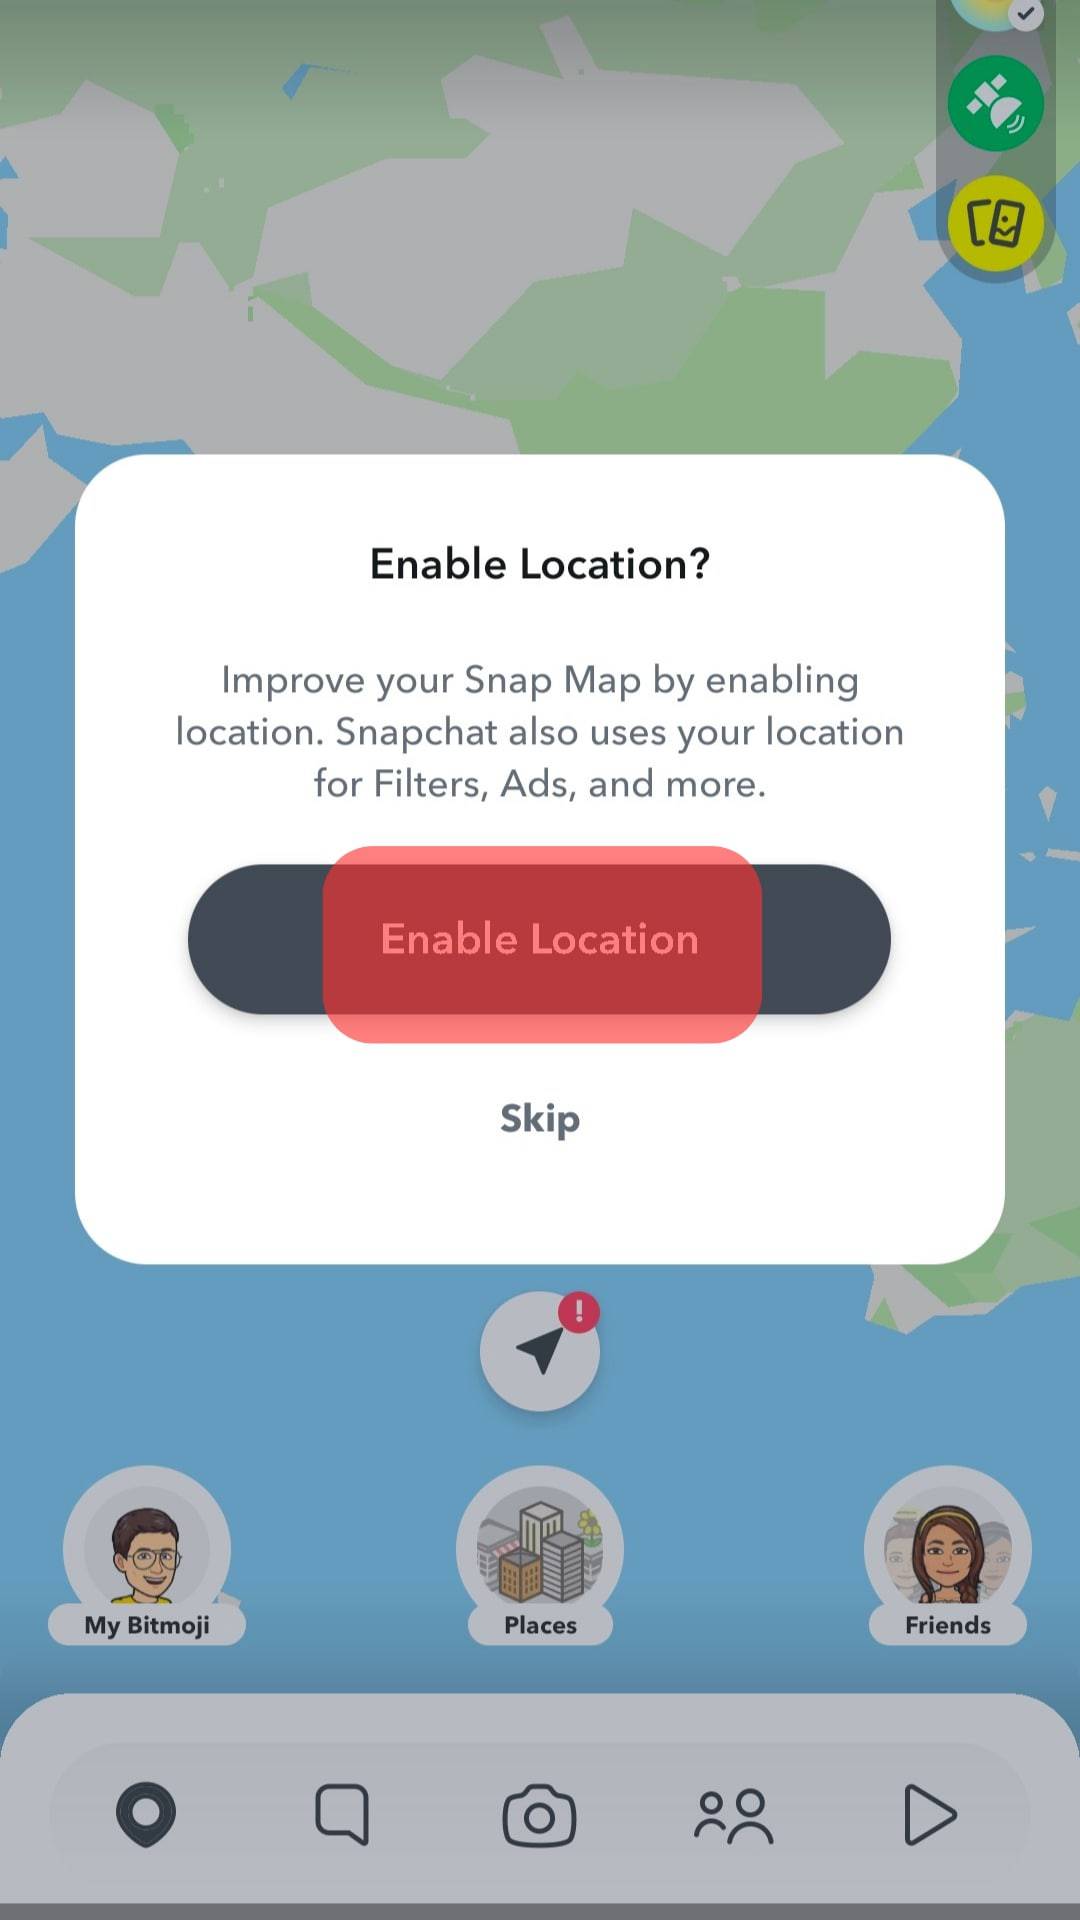 They Should Be Sharing Locations With Snapchat Friends.